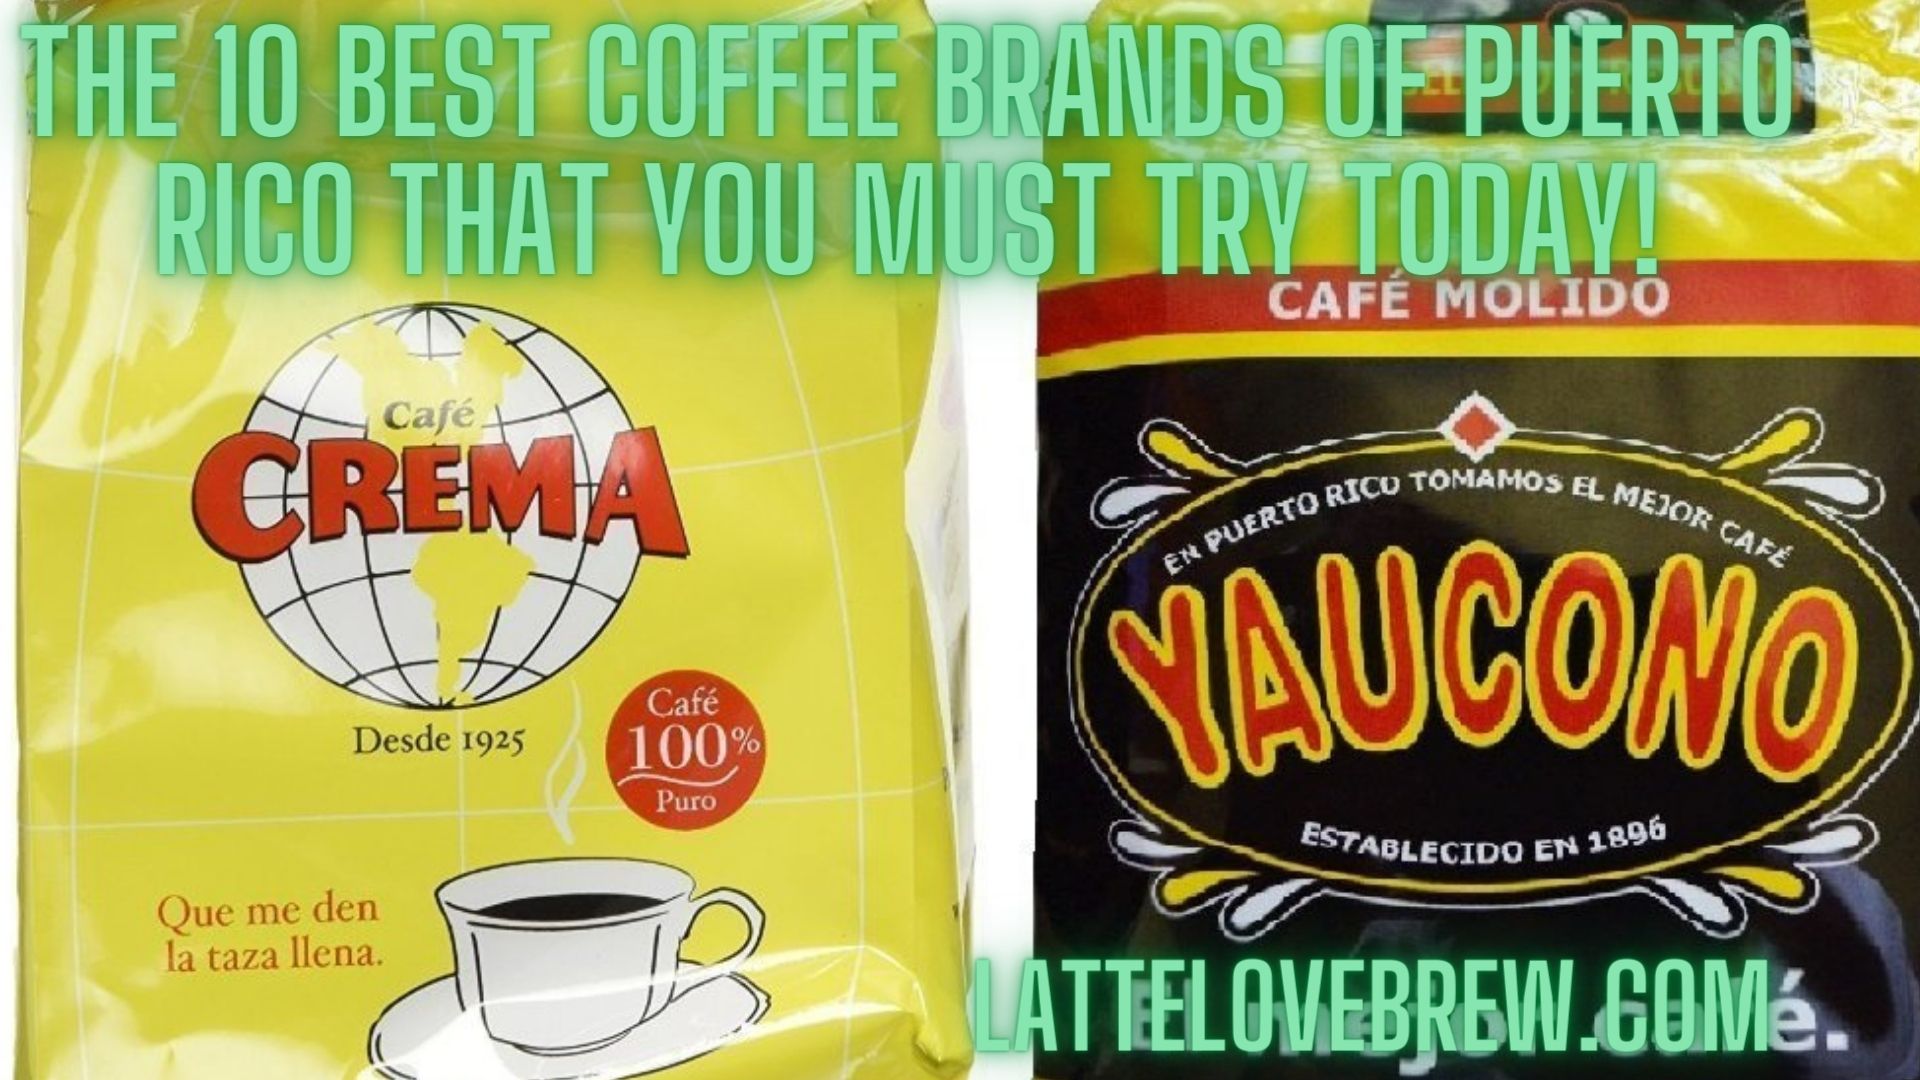 The 10 Best Coffee Brands Of Puerto You Must Try Today! Latte Love Brew